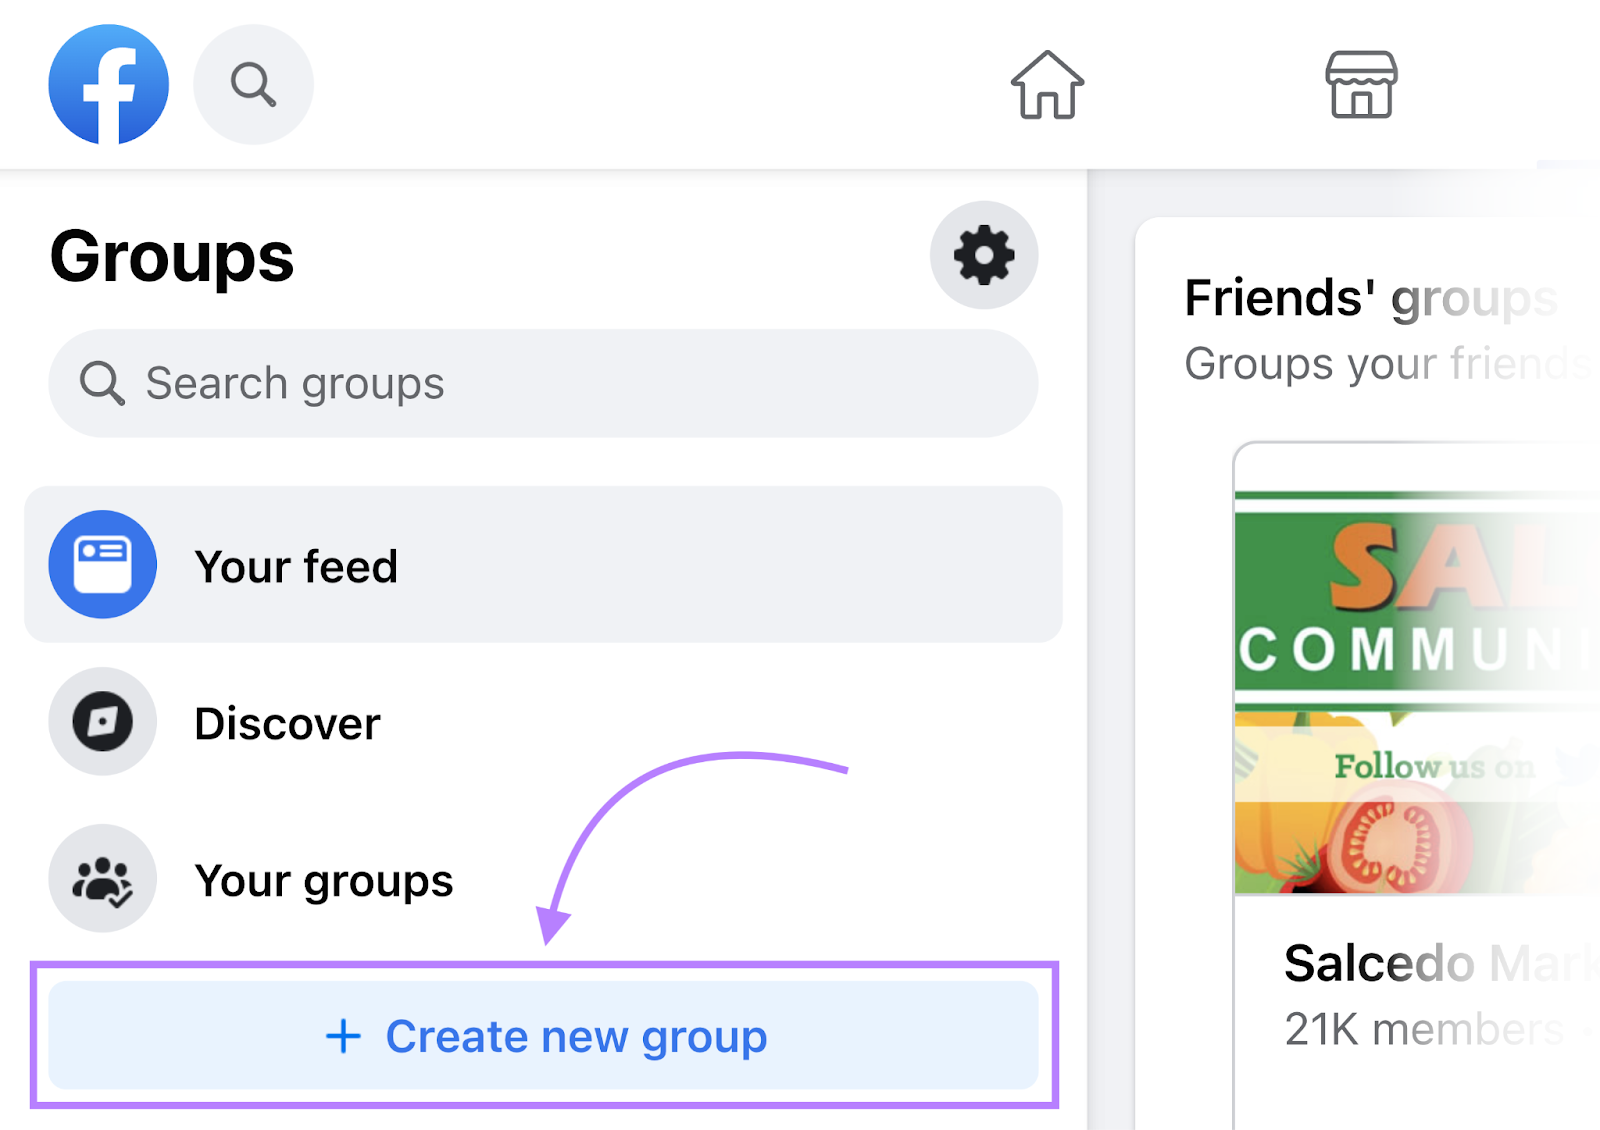 Create new group button